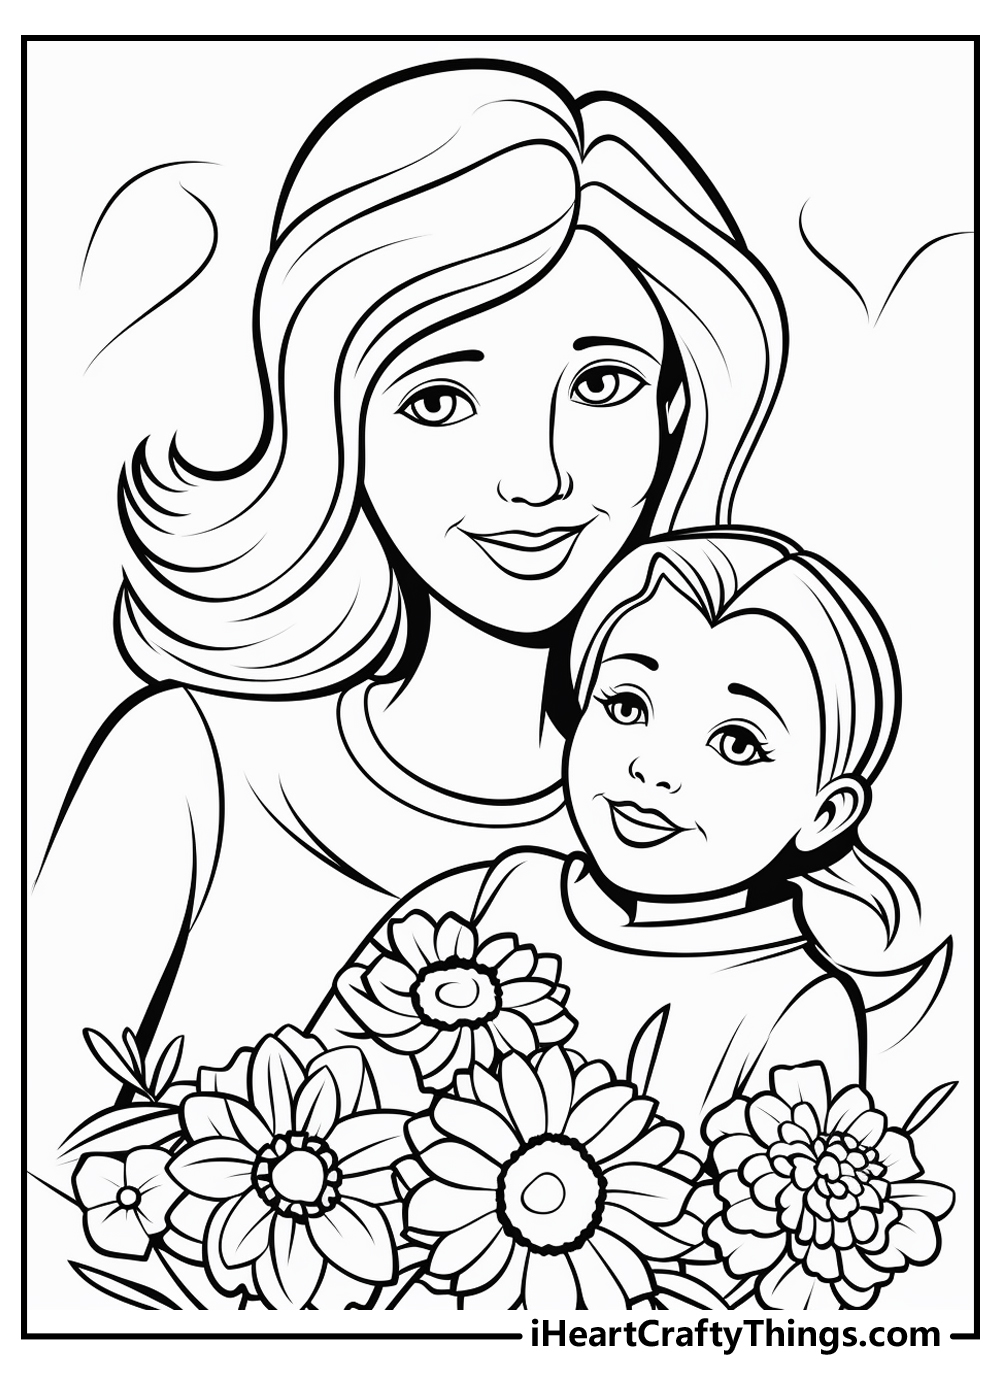 mother's day coloring printable for kids